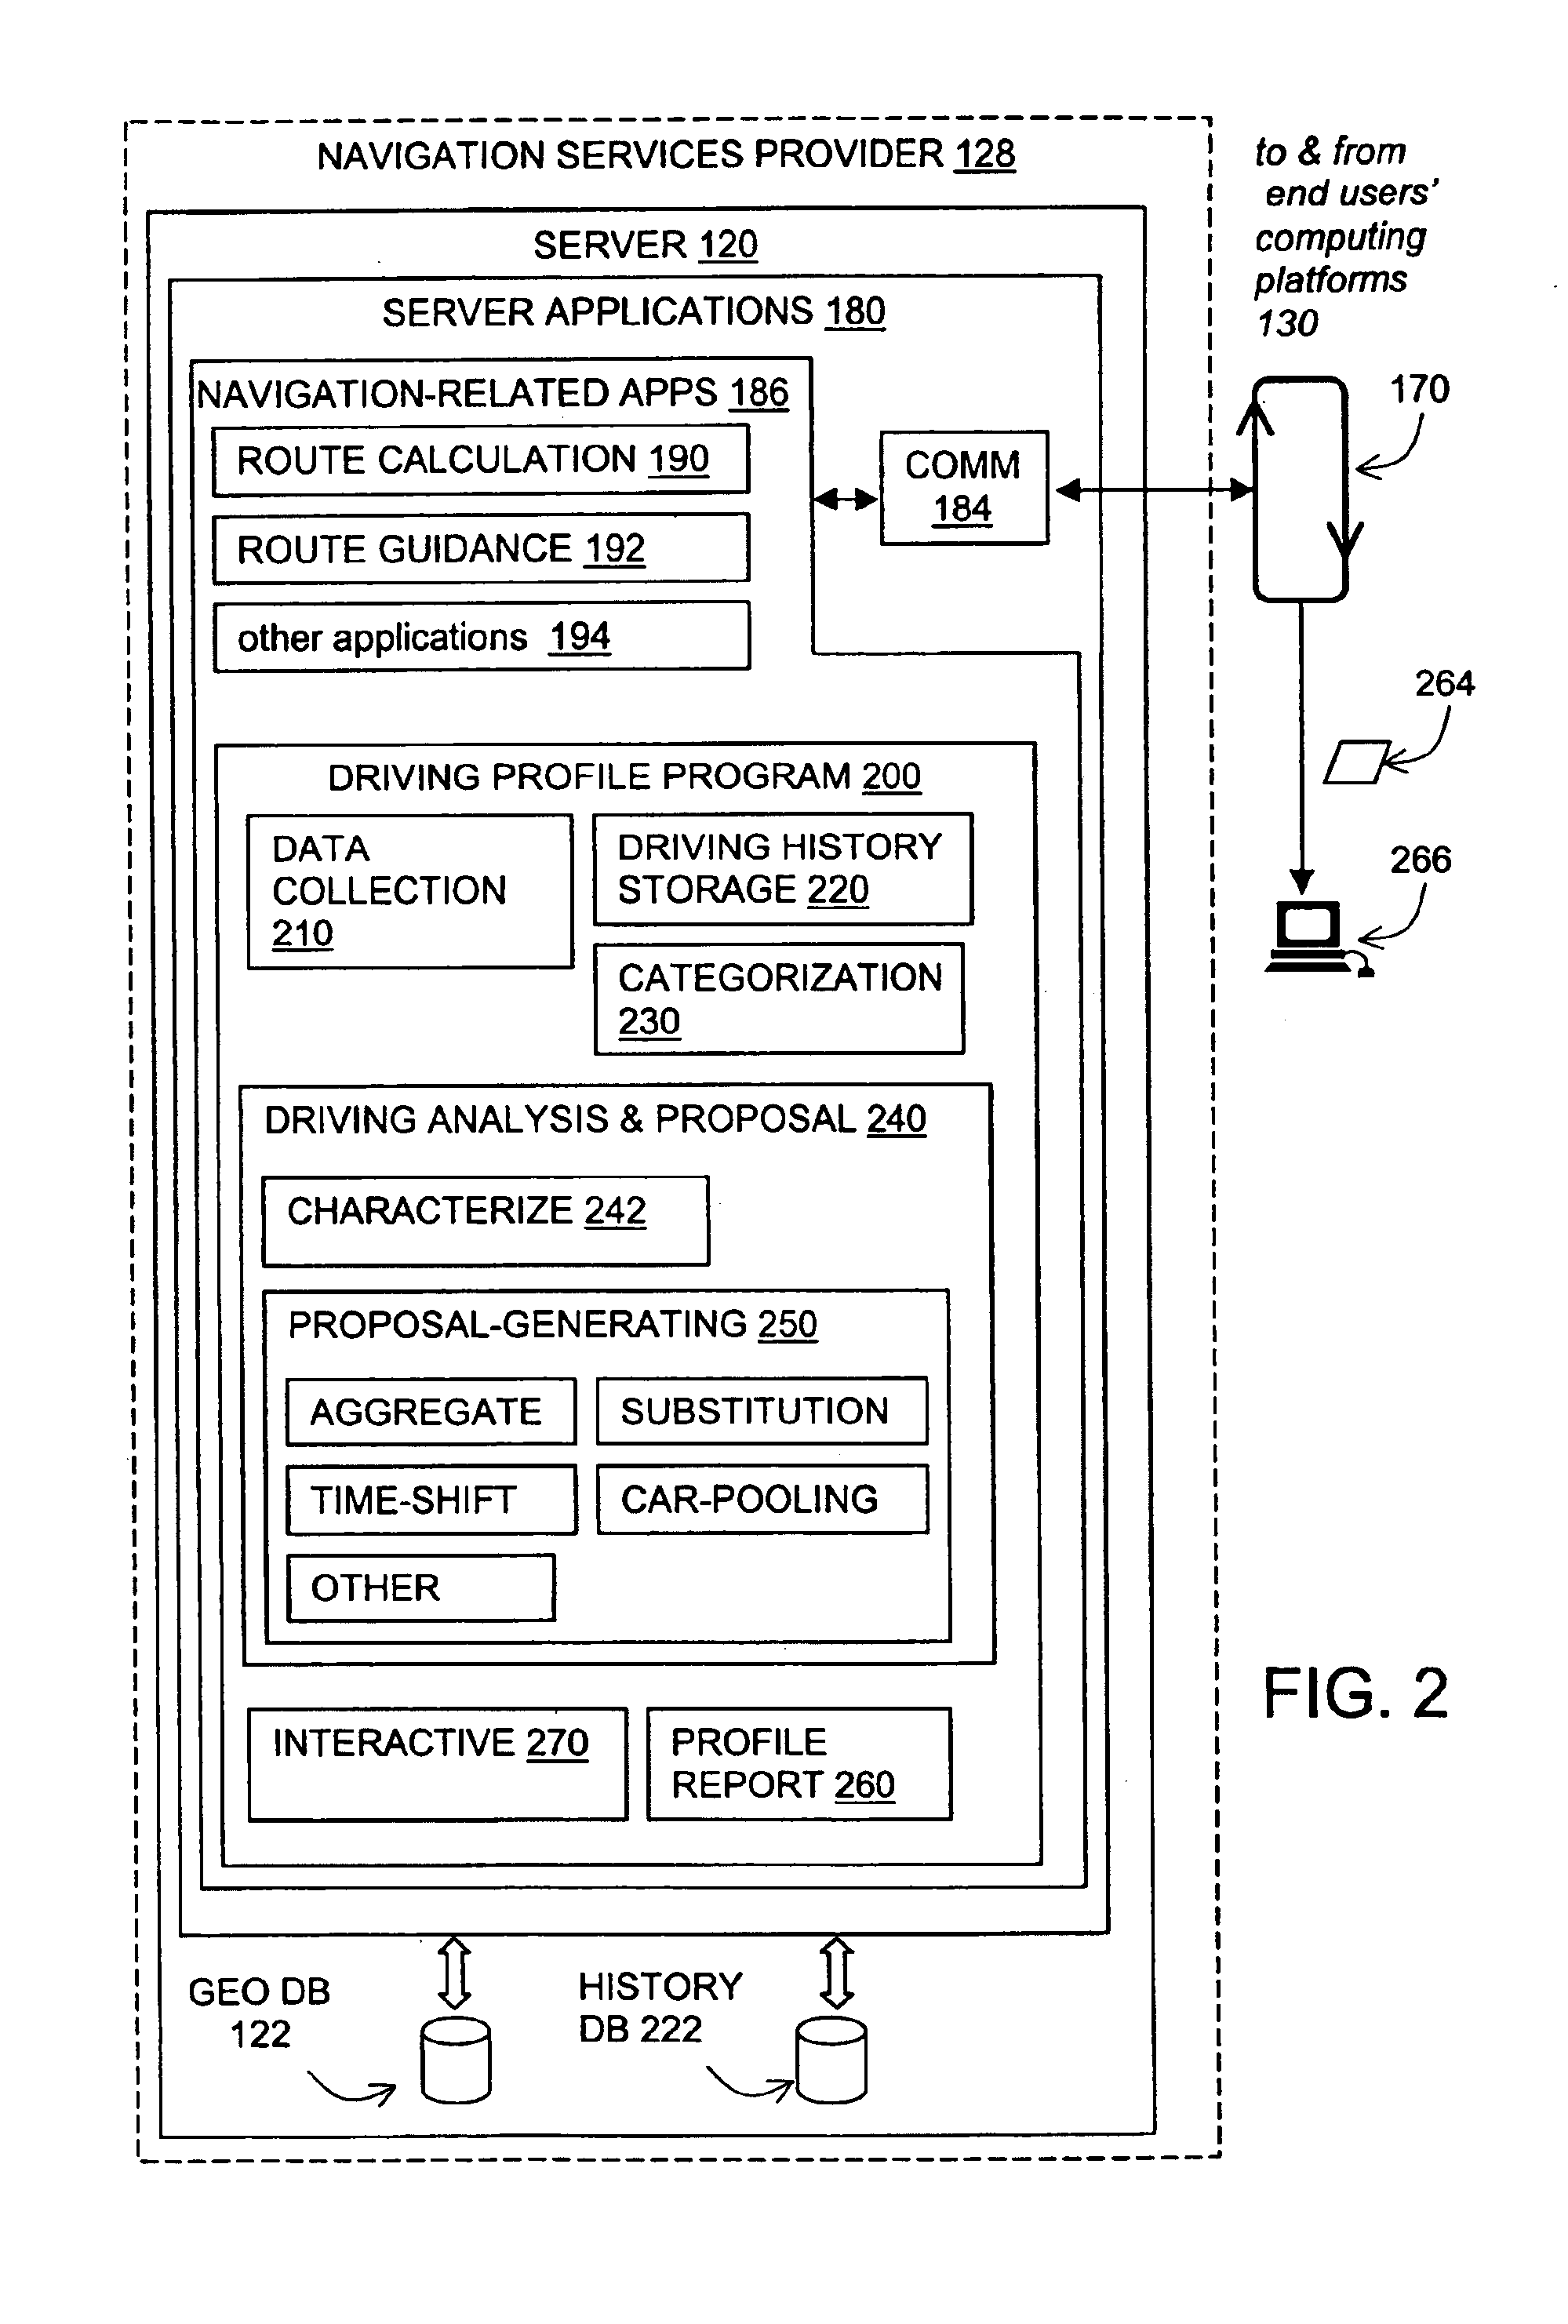 Method of operation of a navigation system to reduce expenses on future trips and to provide other functions